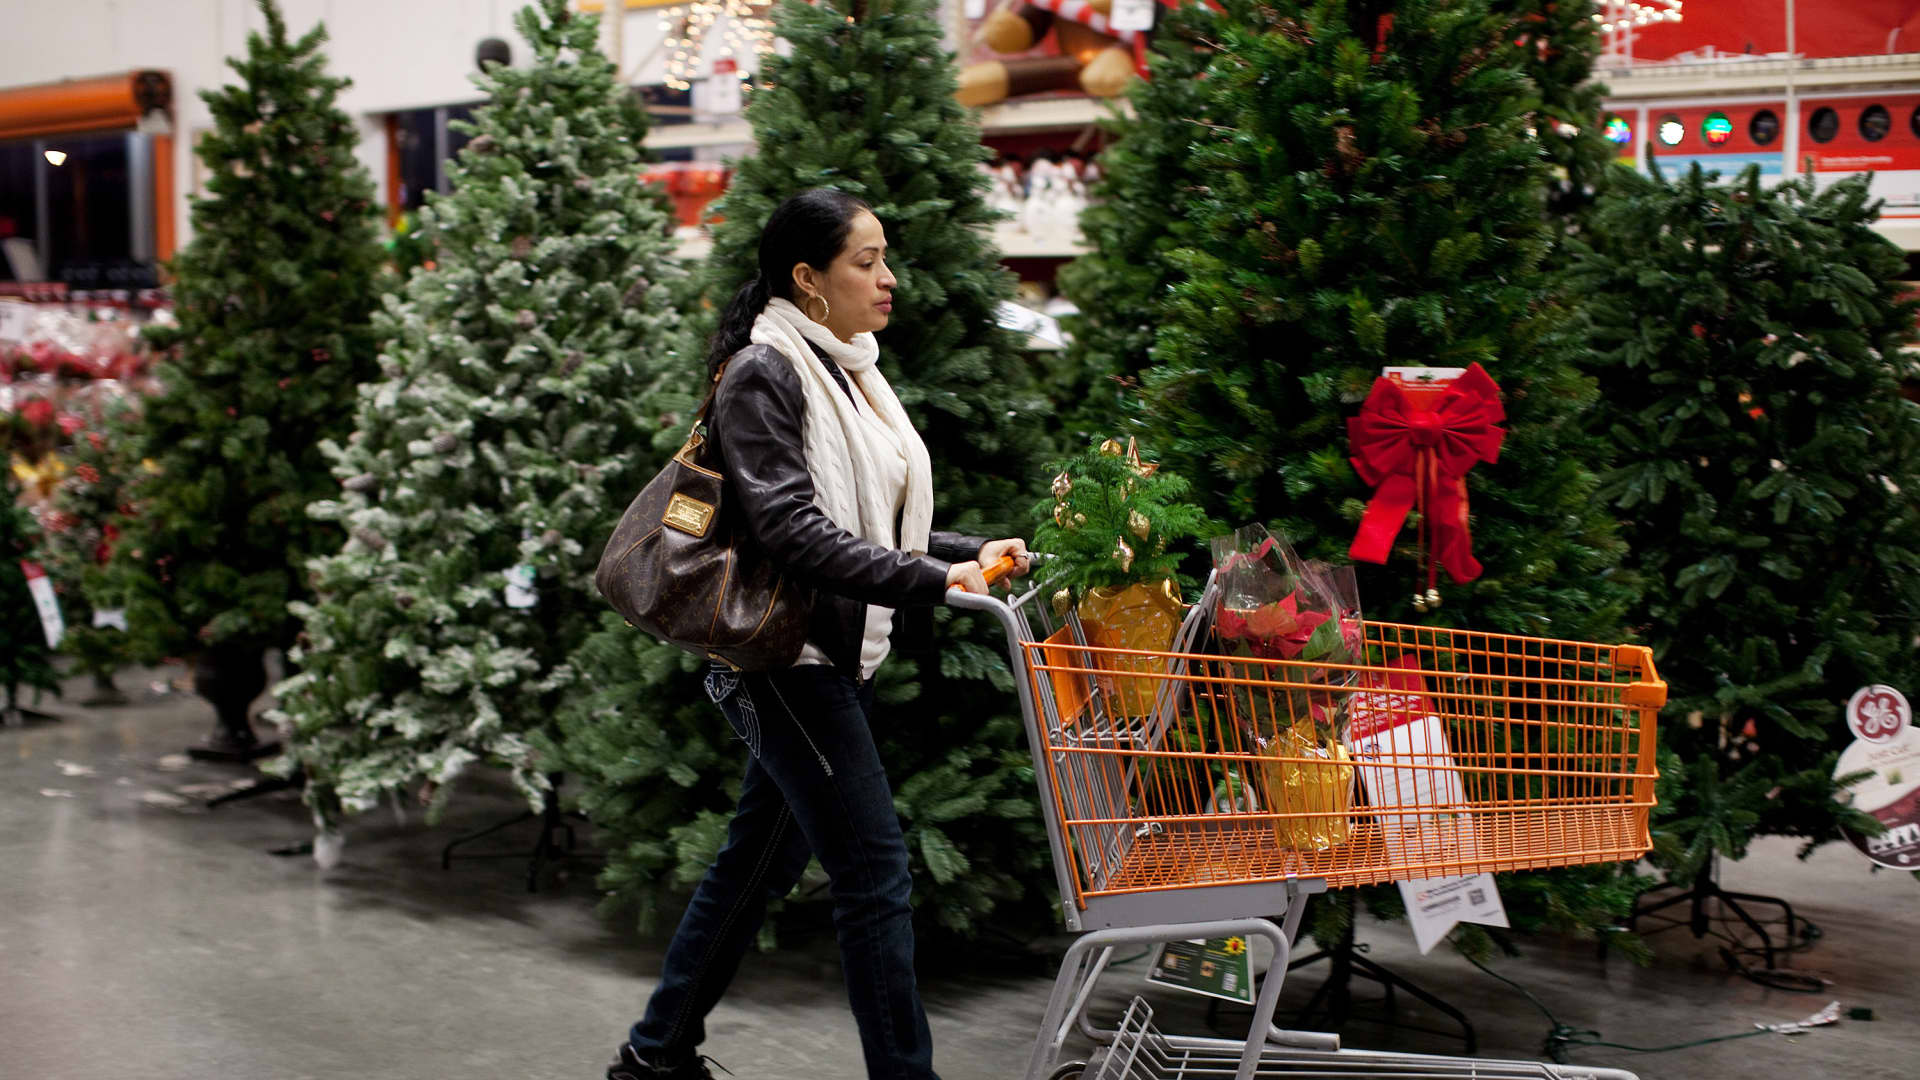 A shopper pushes a cart past a display of artificial Christmas trees at a Home Depot Inc. store in Newark, New Jersey, U.S., on Saturday, Dec. 10, 2011.